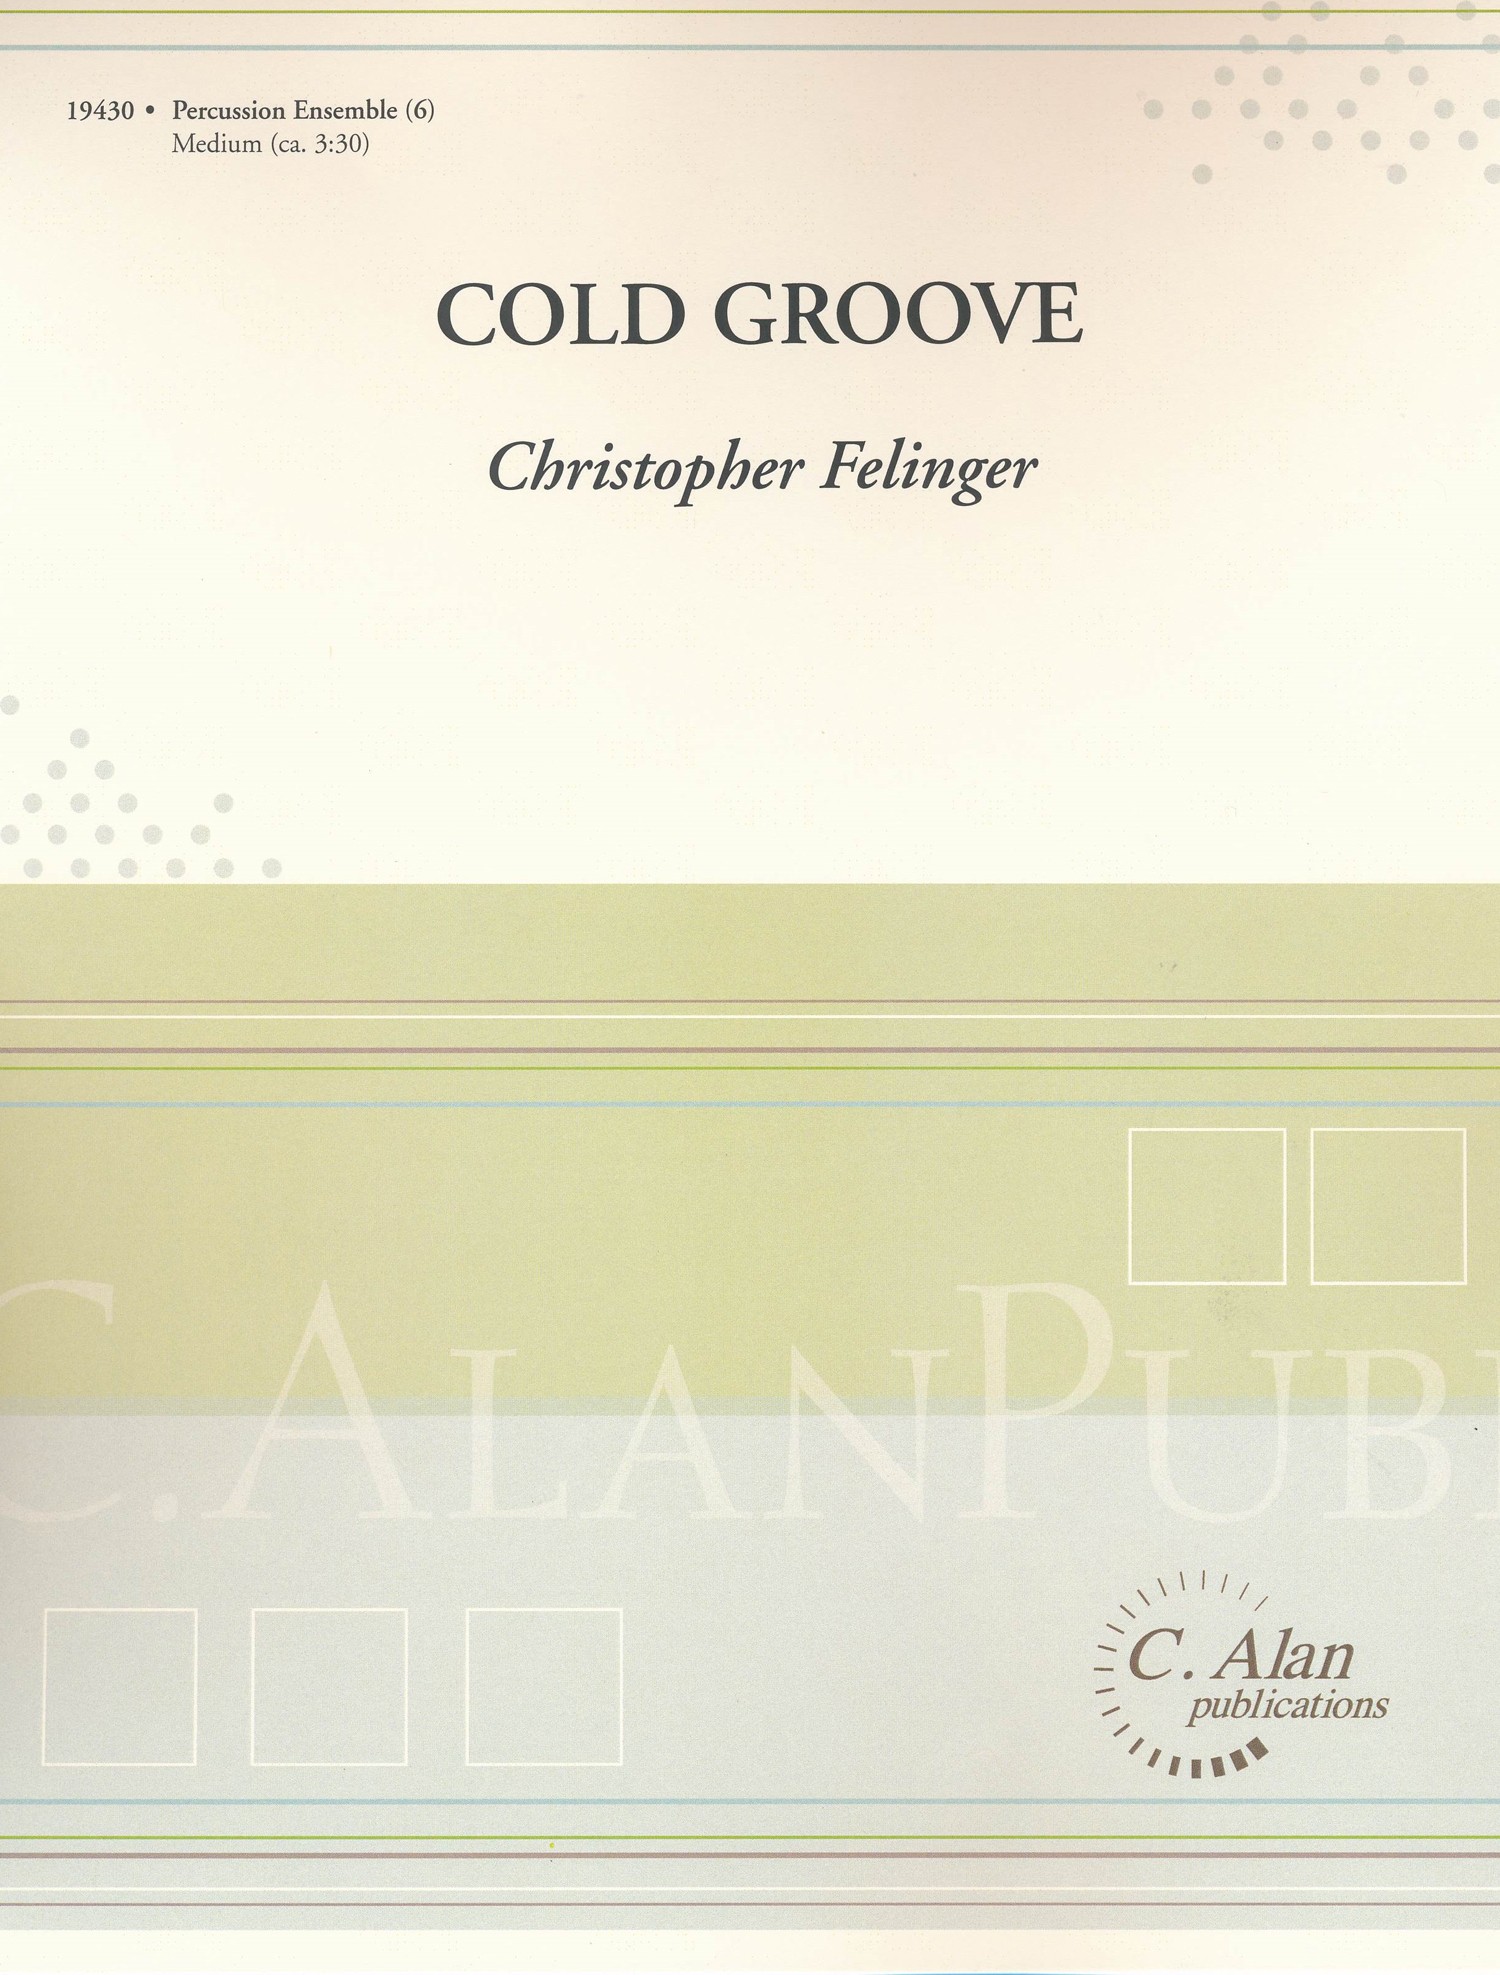 Cold Groove by Christopher Fellinger